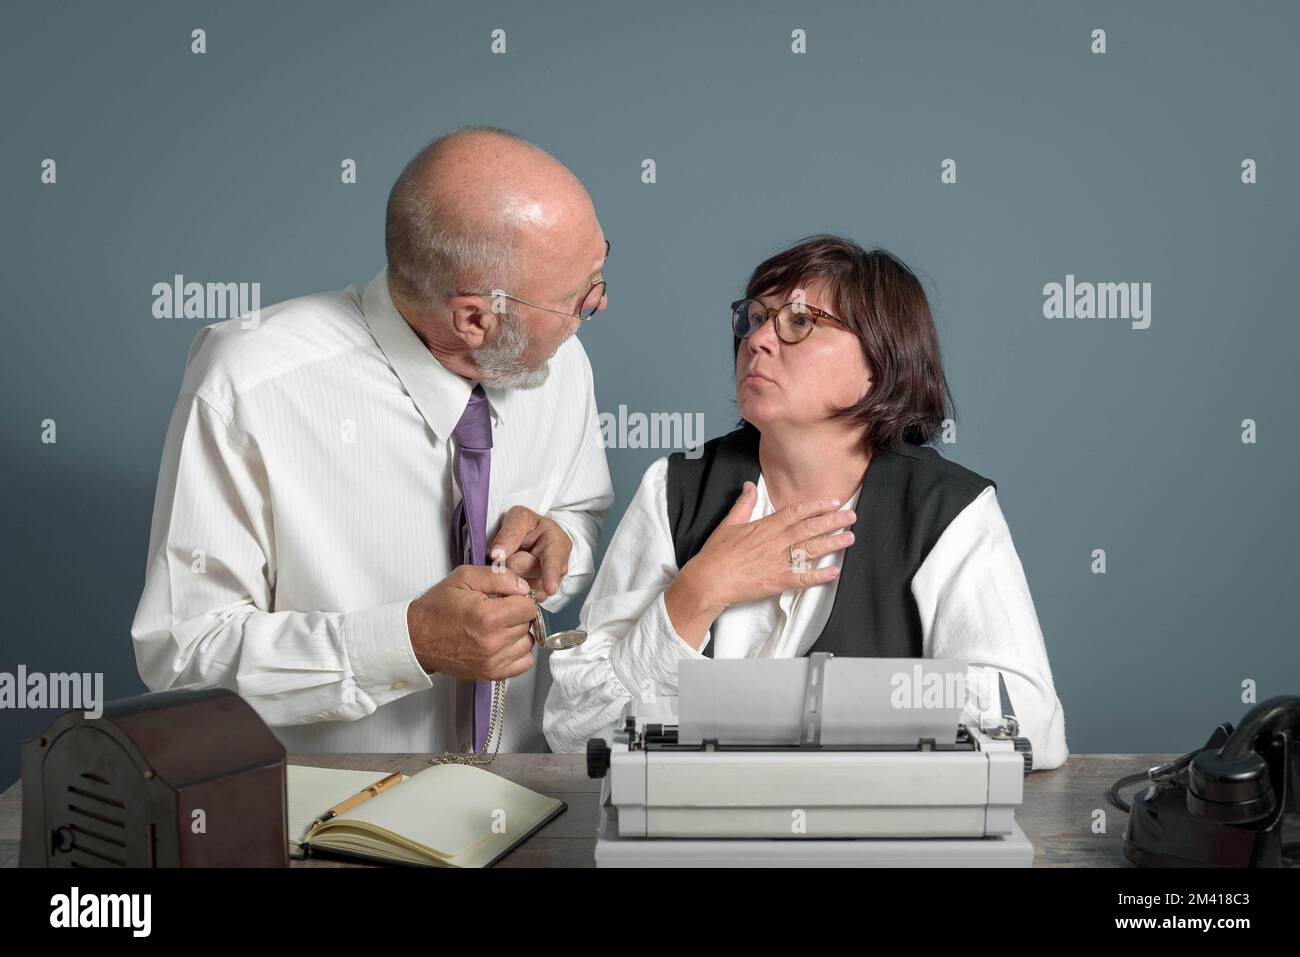 Time is up! Retro office workplace. Elderly boss talking to his expirienced secretary woman pointing finger to watch. Manual typewriter on the table. Stock Photo